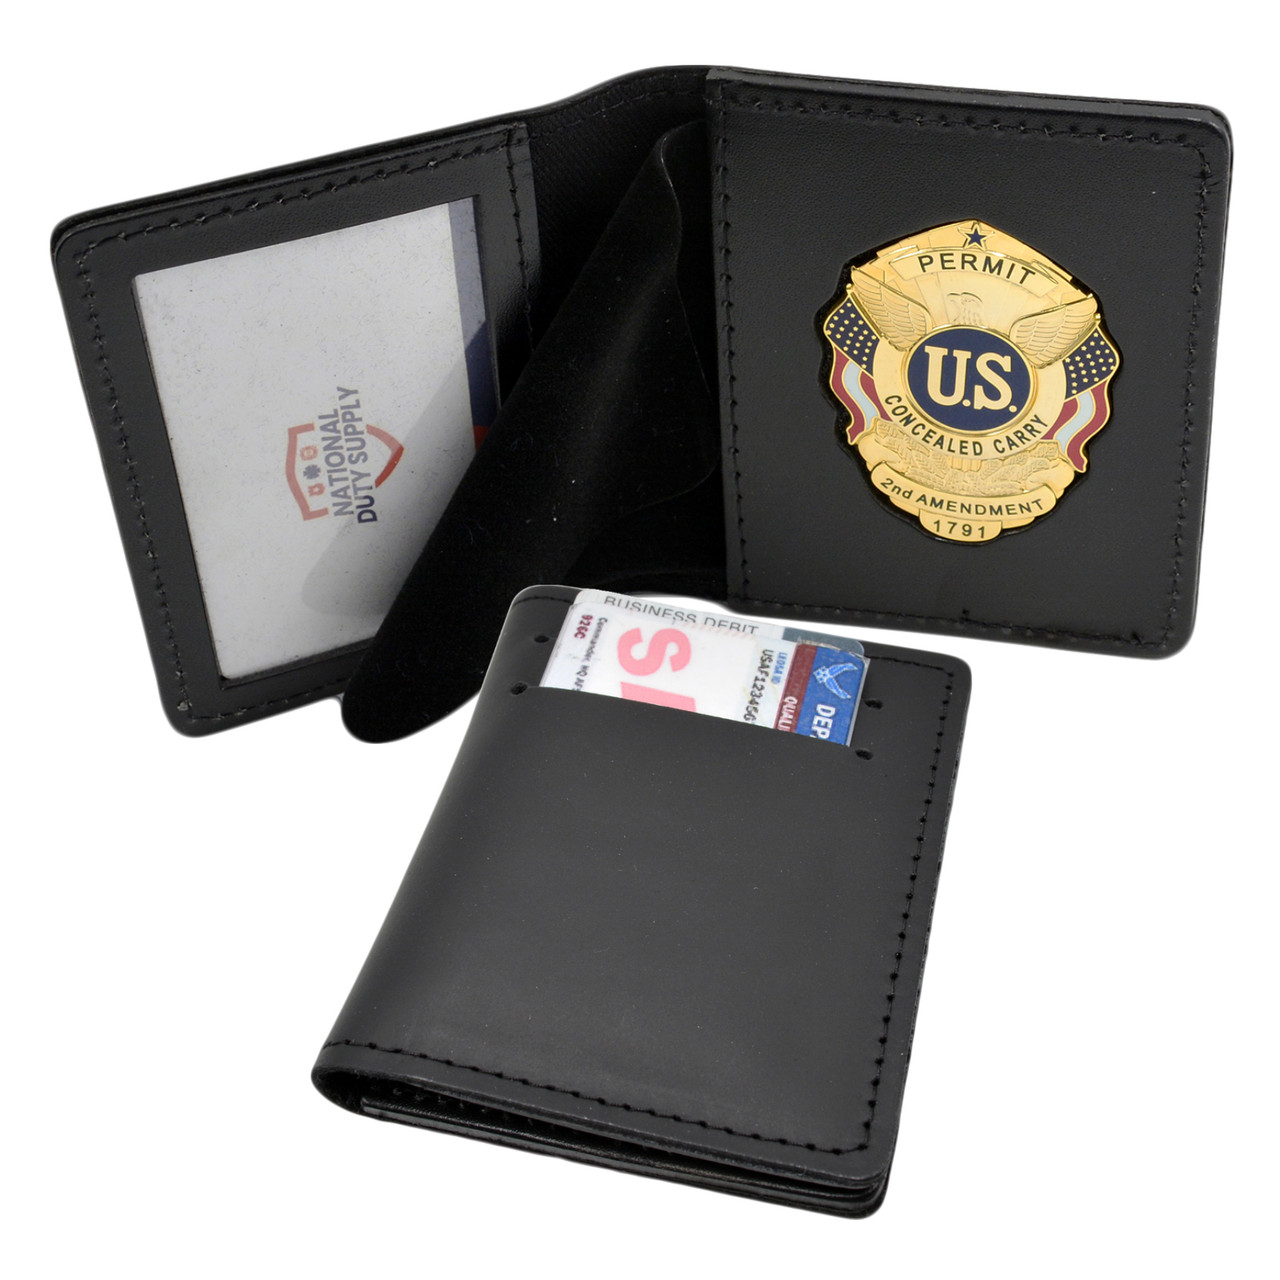 Concealed Carry Permit Badge with Duty Leather Case - Outside Credit Card Slots